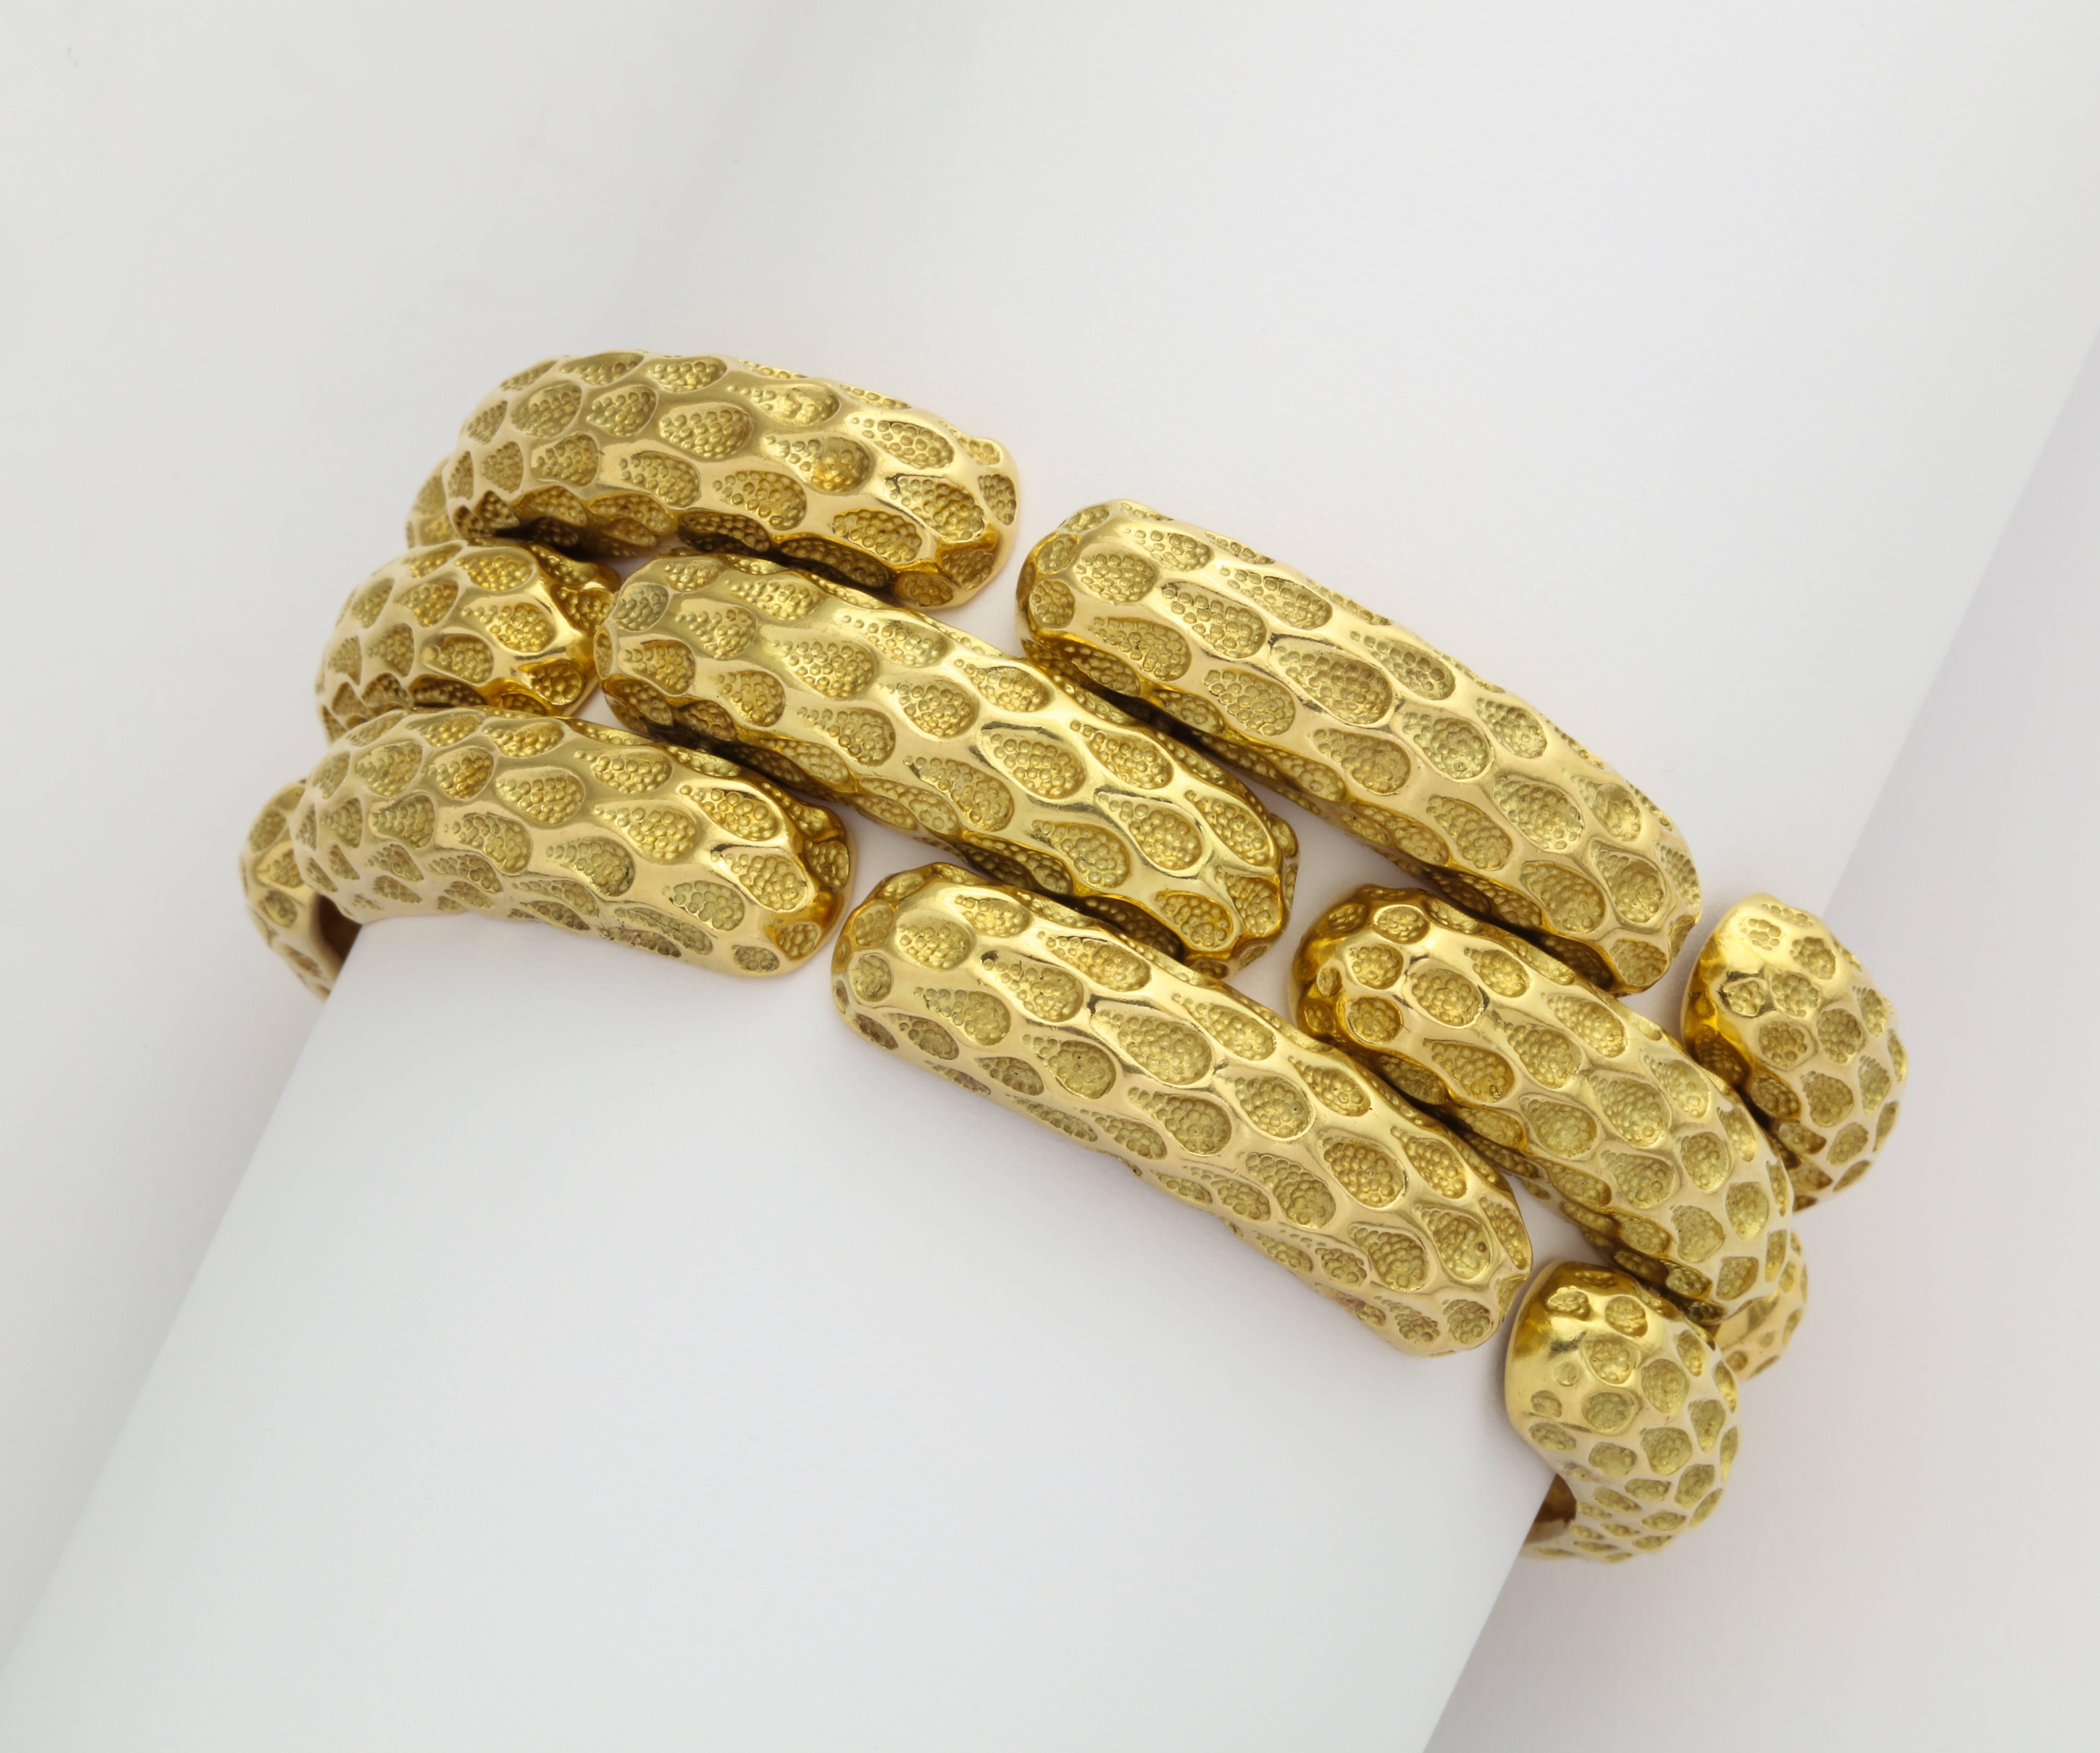 A chic and substantial 1970s Tiffany bracelet in 18K gold with a polished surface pattern replicating net, contrasted by hand applied texture deep in the recesses, all nicely articulated to be comfortably worn day into night. Marked Tiffany - Italy